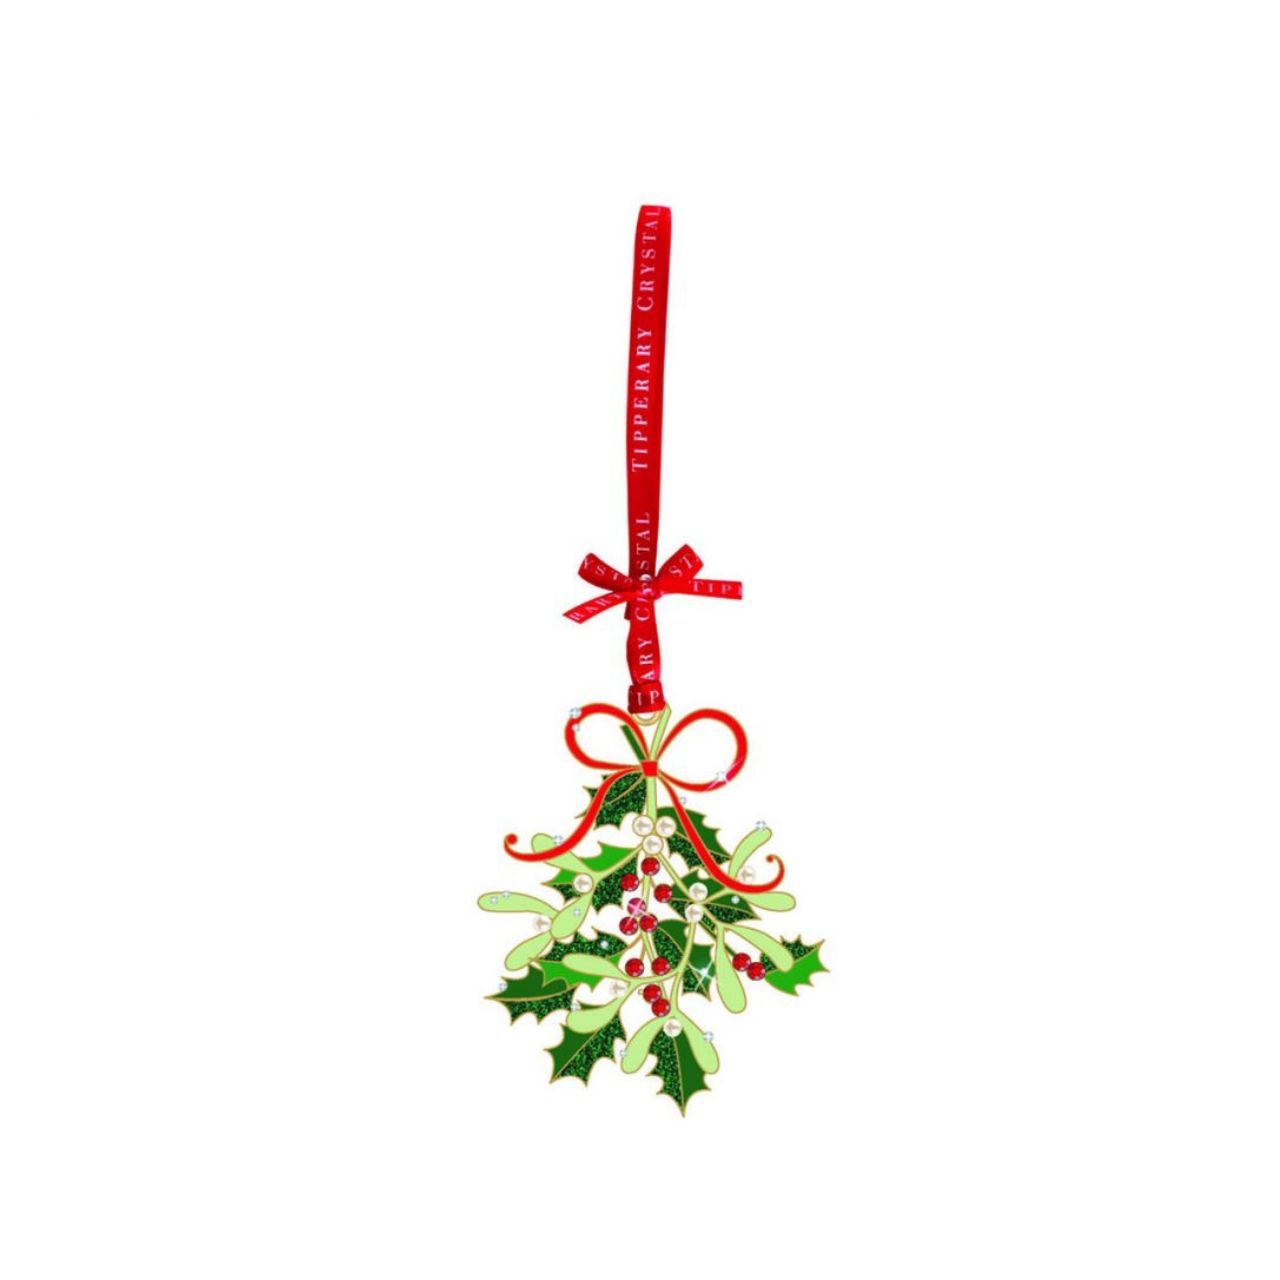 Sparkle Mistletoe Christmas Decoration  We just Love Christmas! The festive season, the giving of gifts, creating memories and being together with family and loved ones. Have lots of fun with our lovingly designed and created Christmas decorations, each one has a magic sparkle of elf dust!